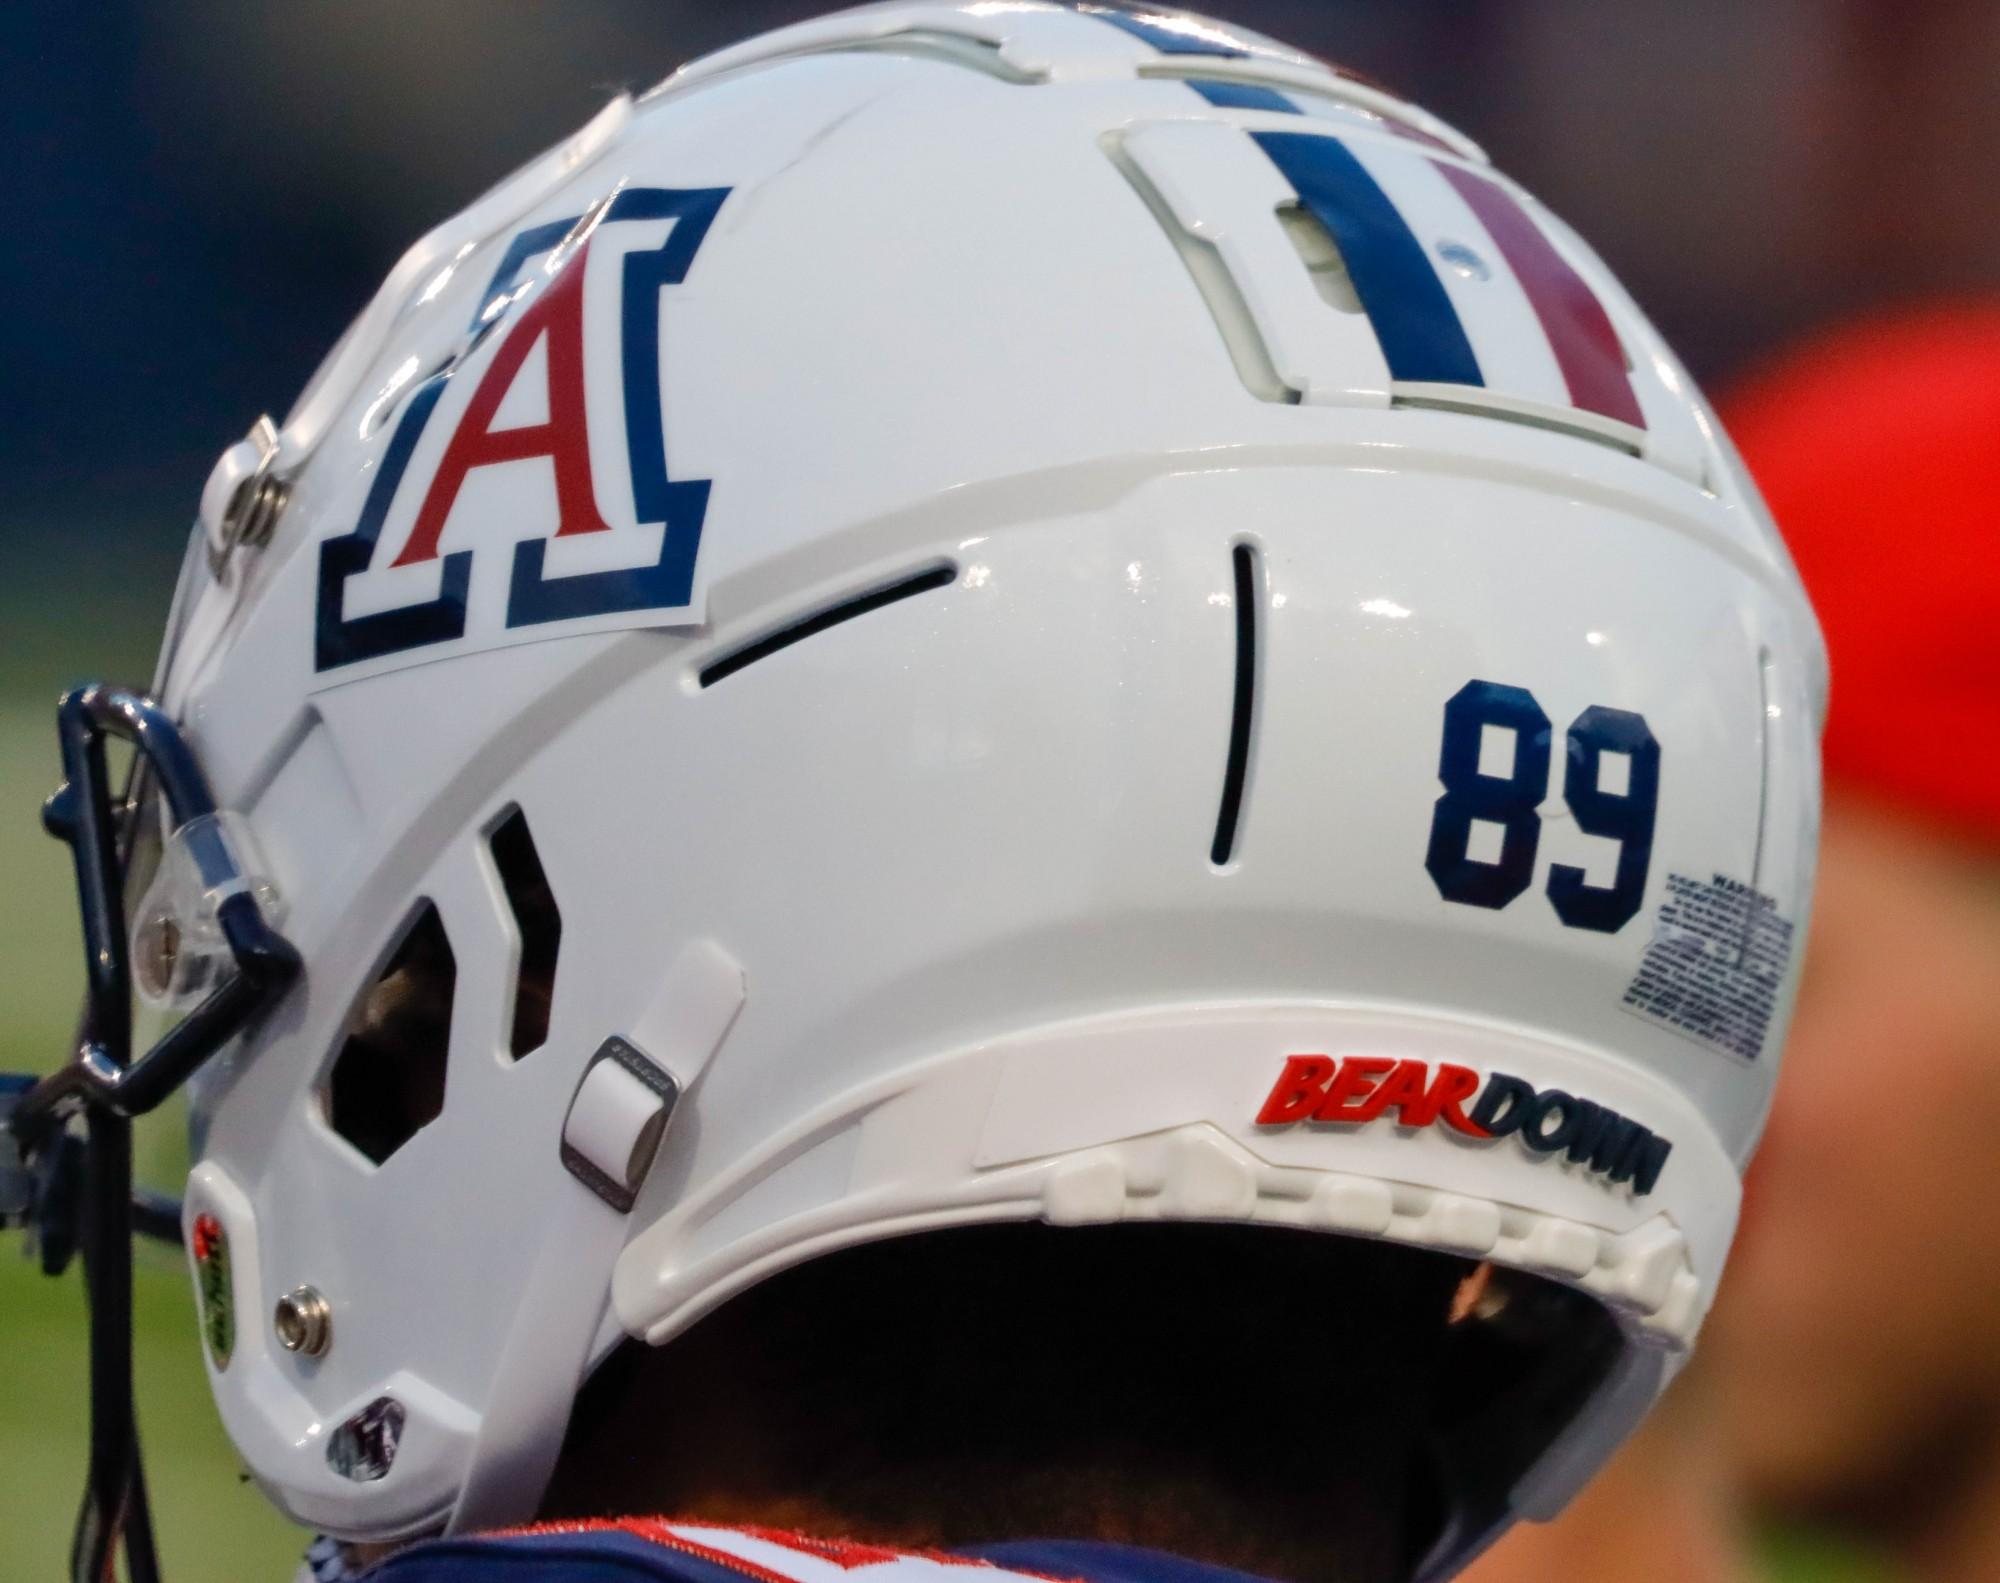 Oregon gets another commitment from a top-5 Arizona football recruit